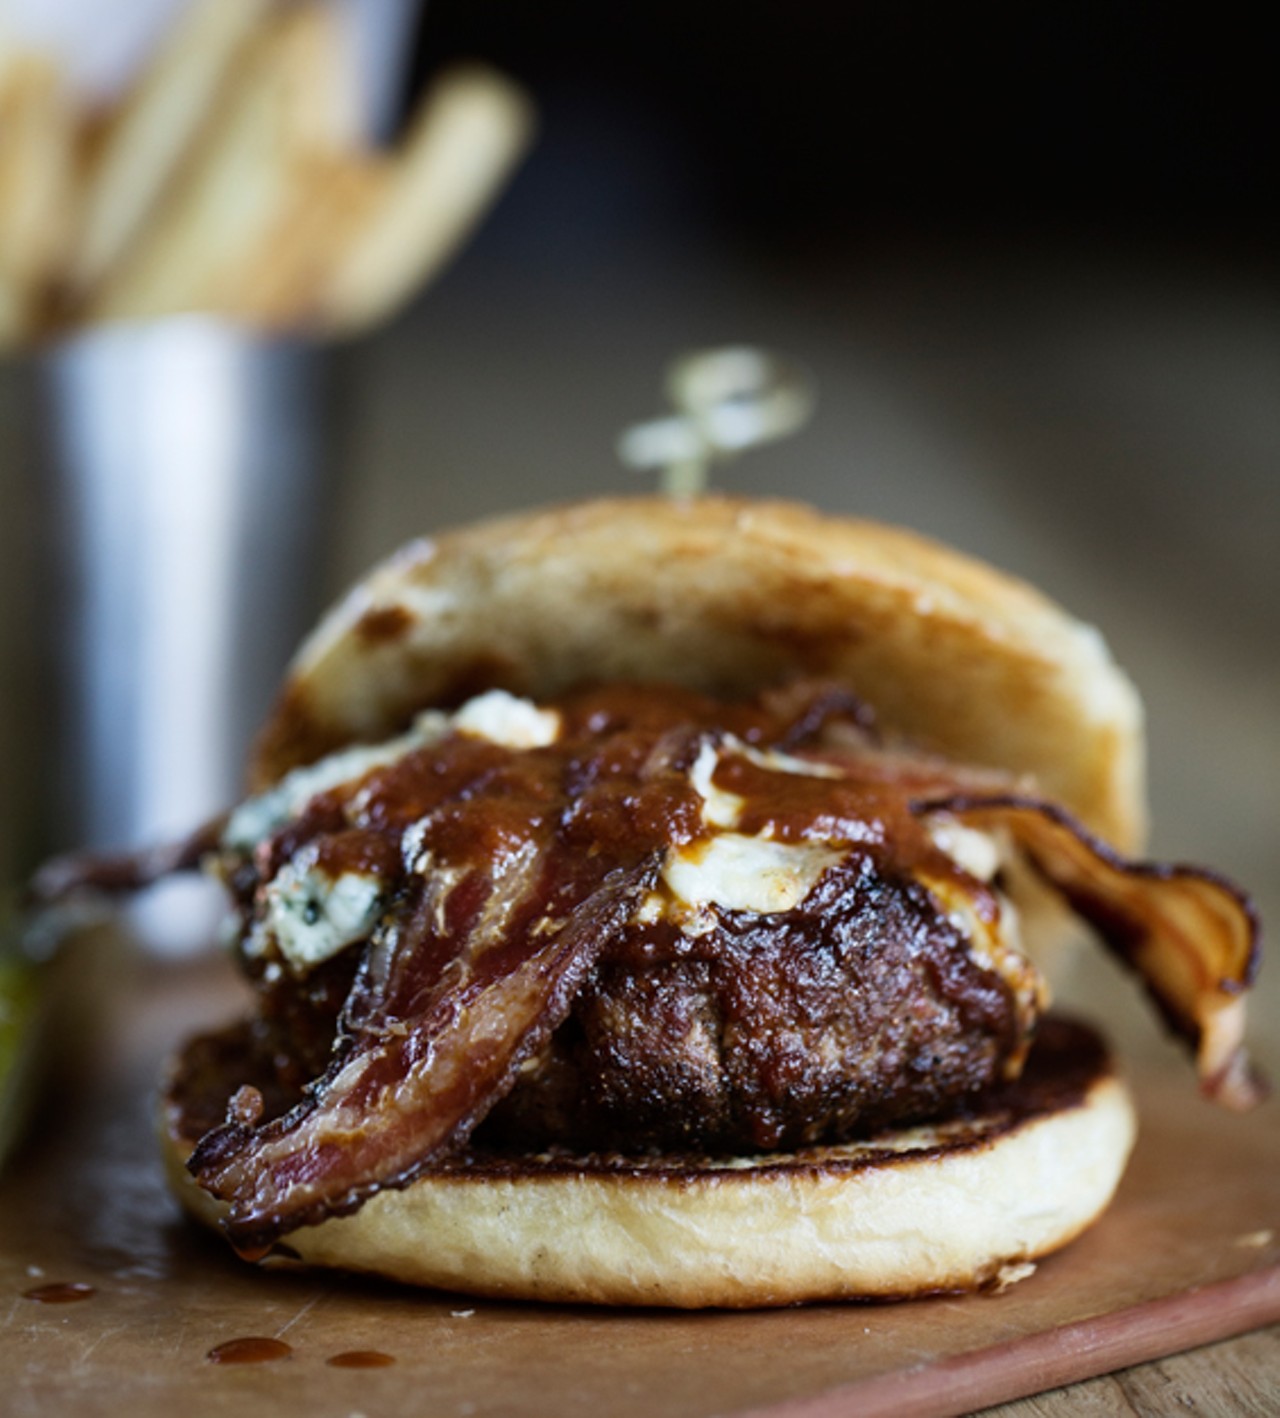 The "BBBB" is&nbsp;barbecued burger made of a blend&nbsp;of bison, blue cheese and bacon on a brioche bun.